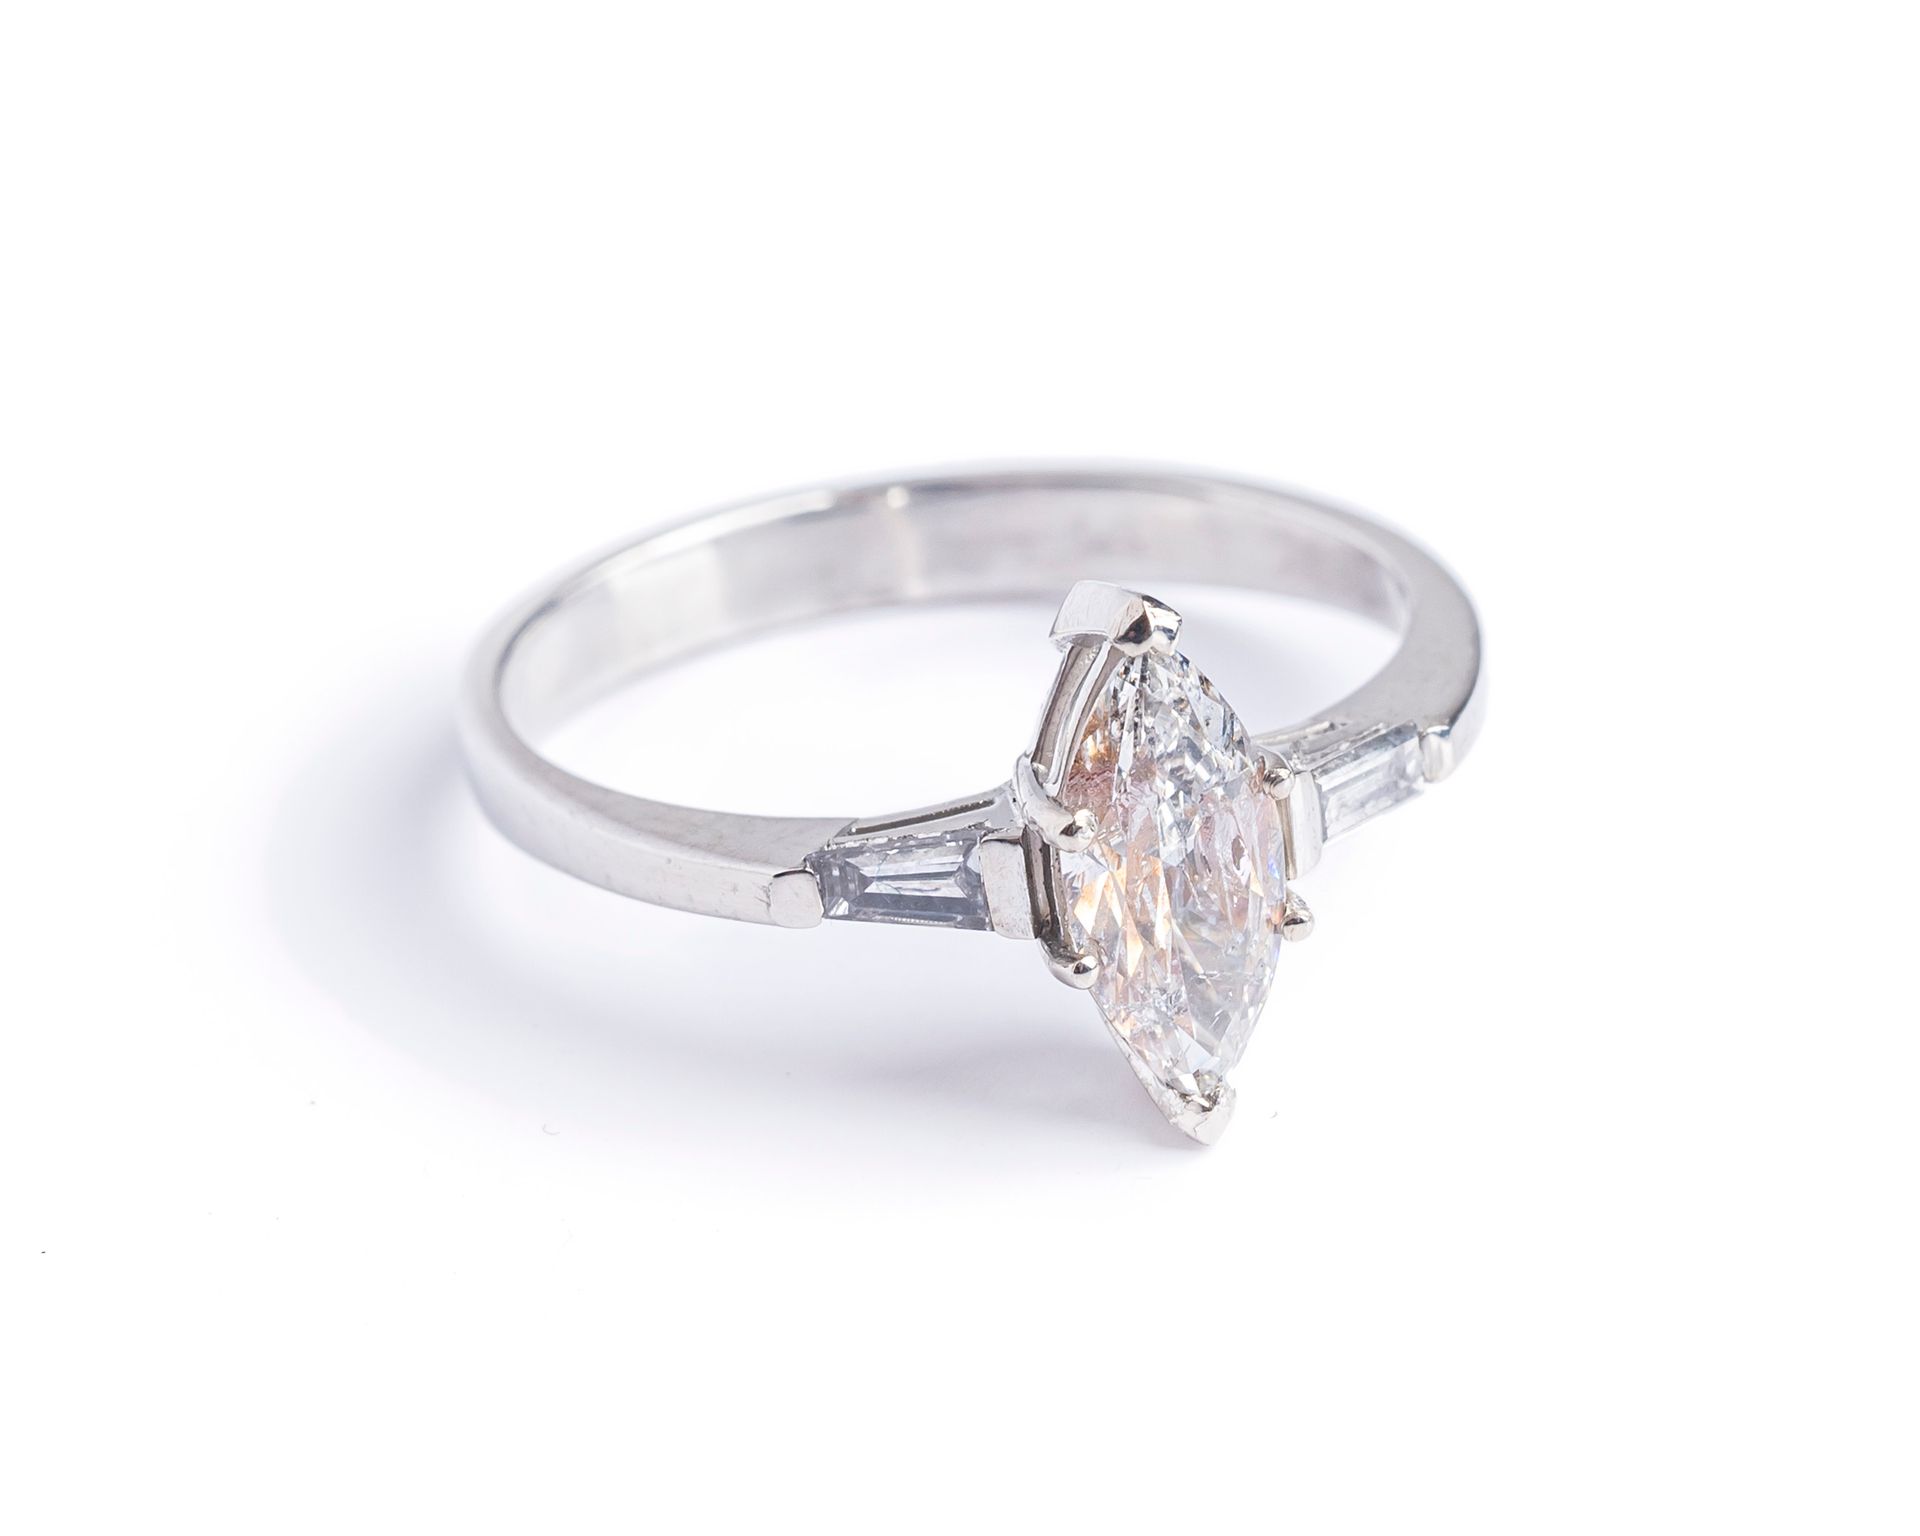 Null Ring in 18K (750 thousandths) white gold, set with a navette-cut diamond of&hellip;